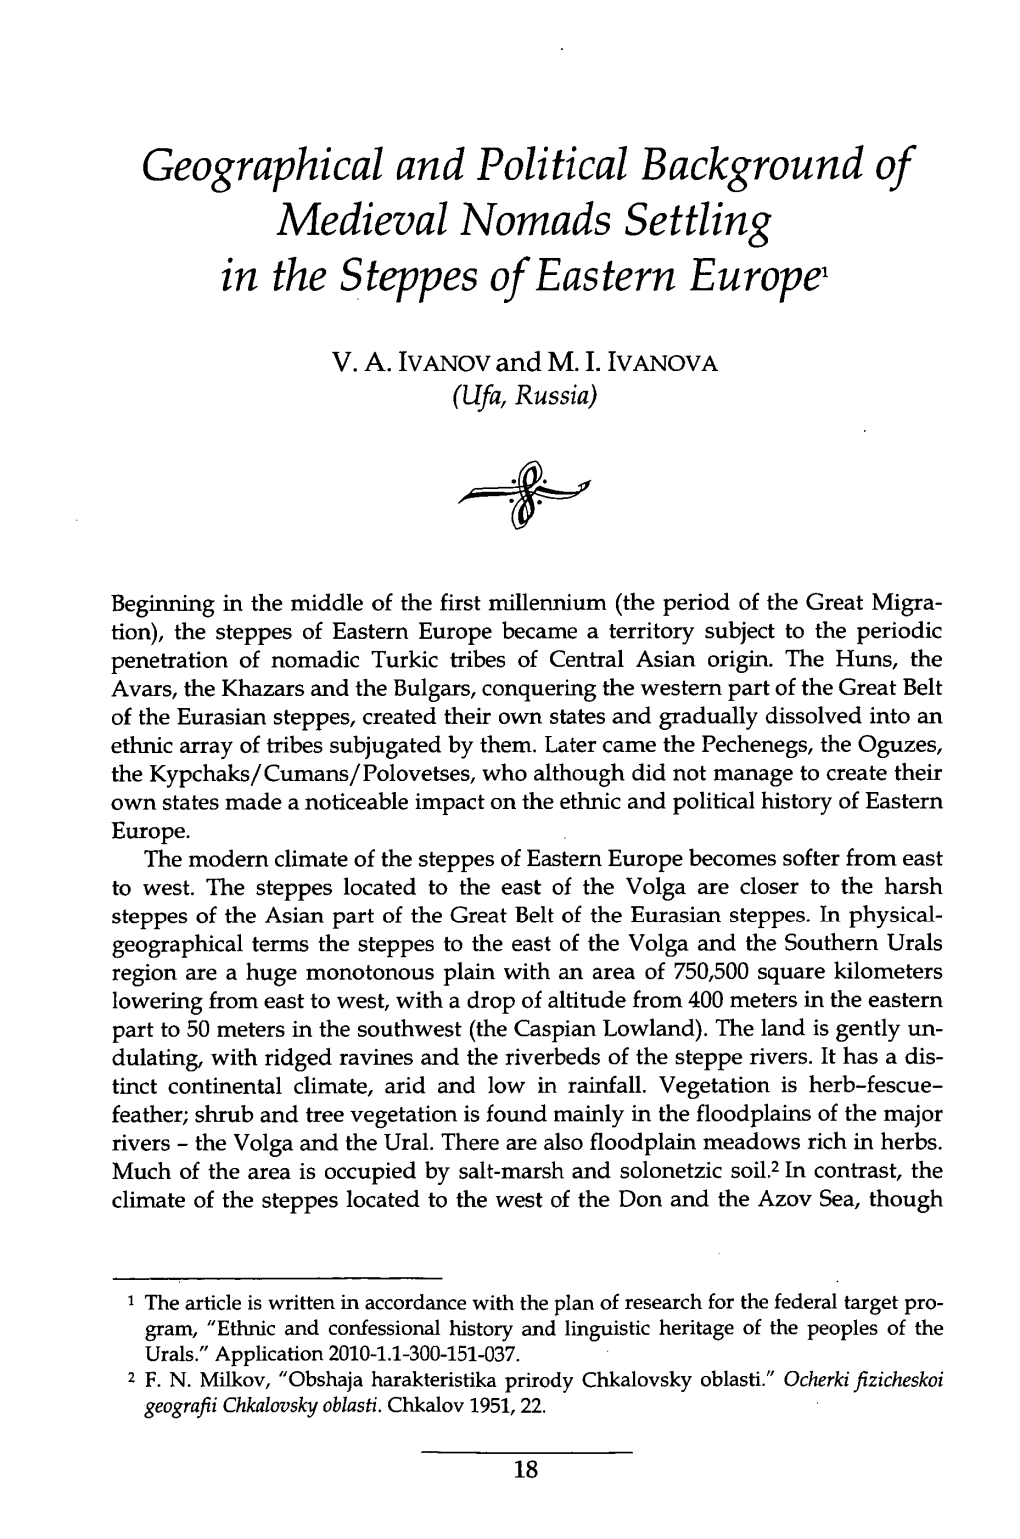 Geographical and Political Background of Medieval Nomads Settling in the Steppes of Eastern Europe1